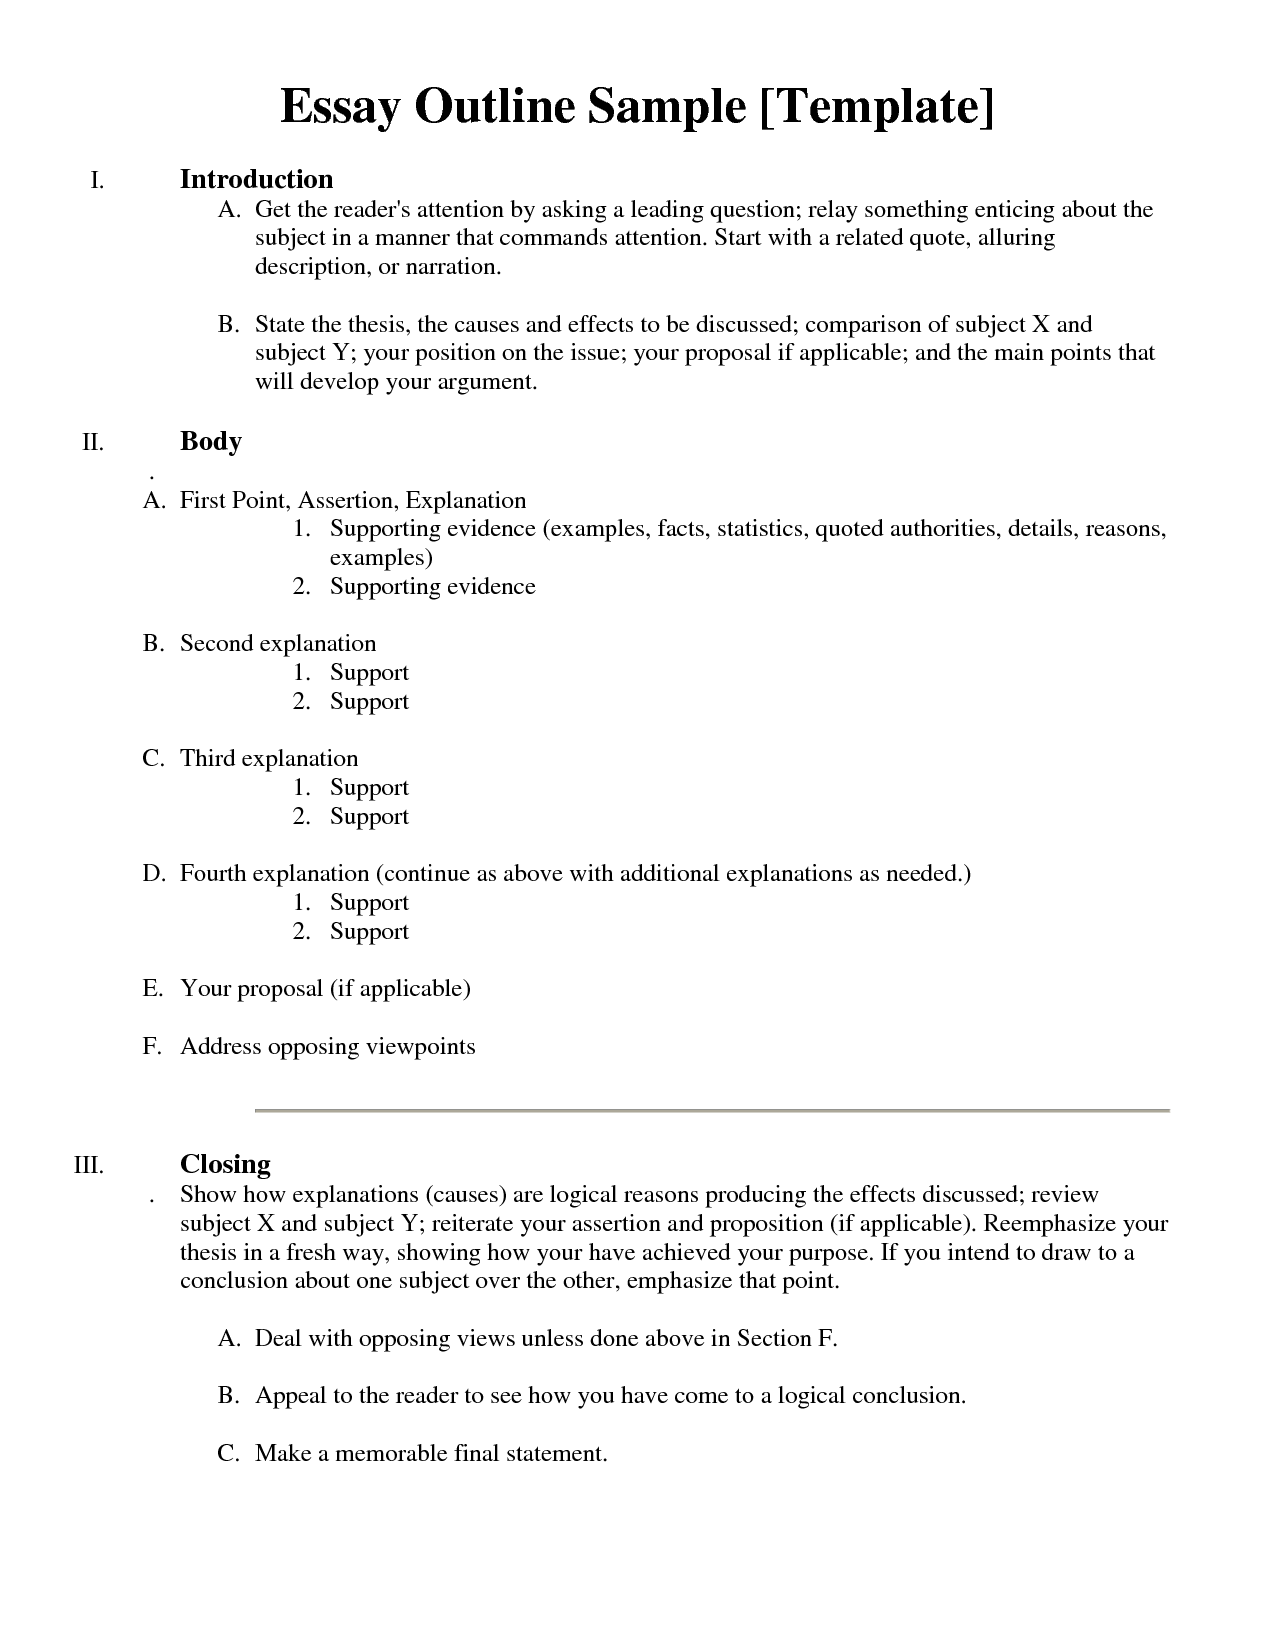 Example Essay Outline Template Image